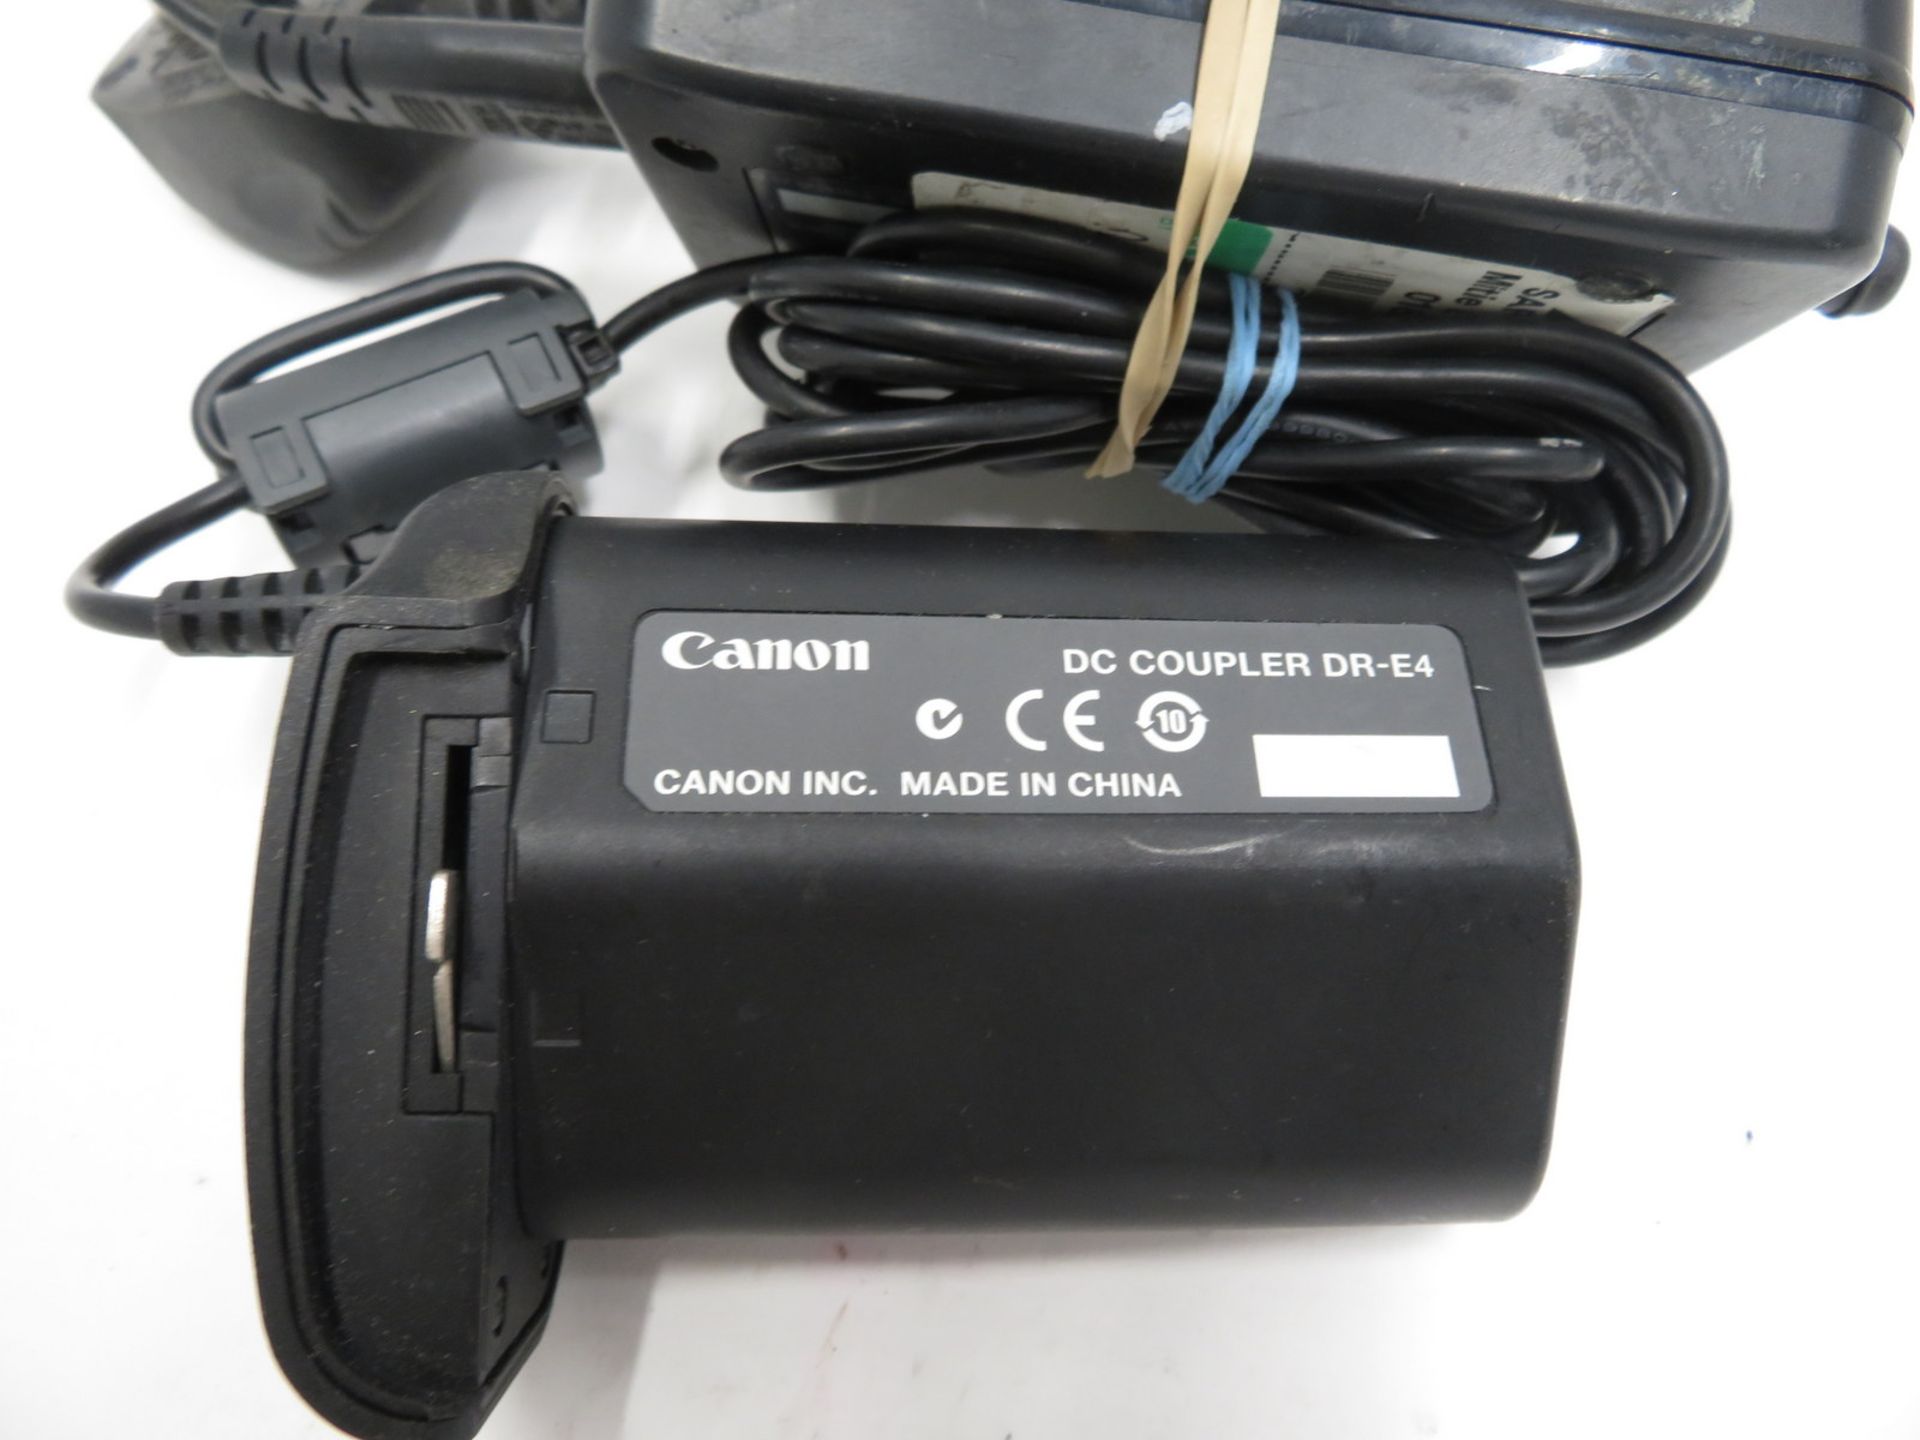 Canon DR-E4 DC coupler with mains adapter - Image 2 of 4